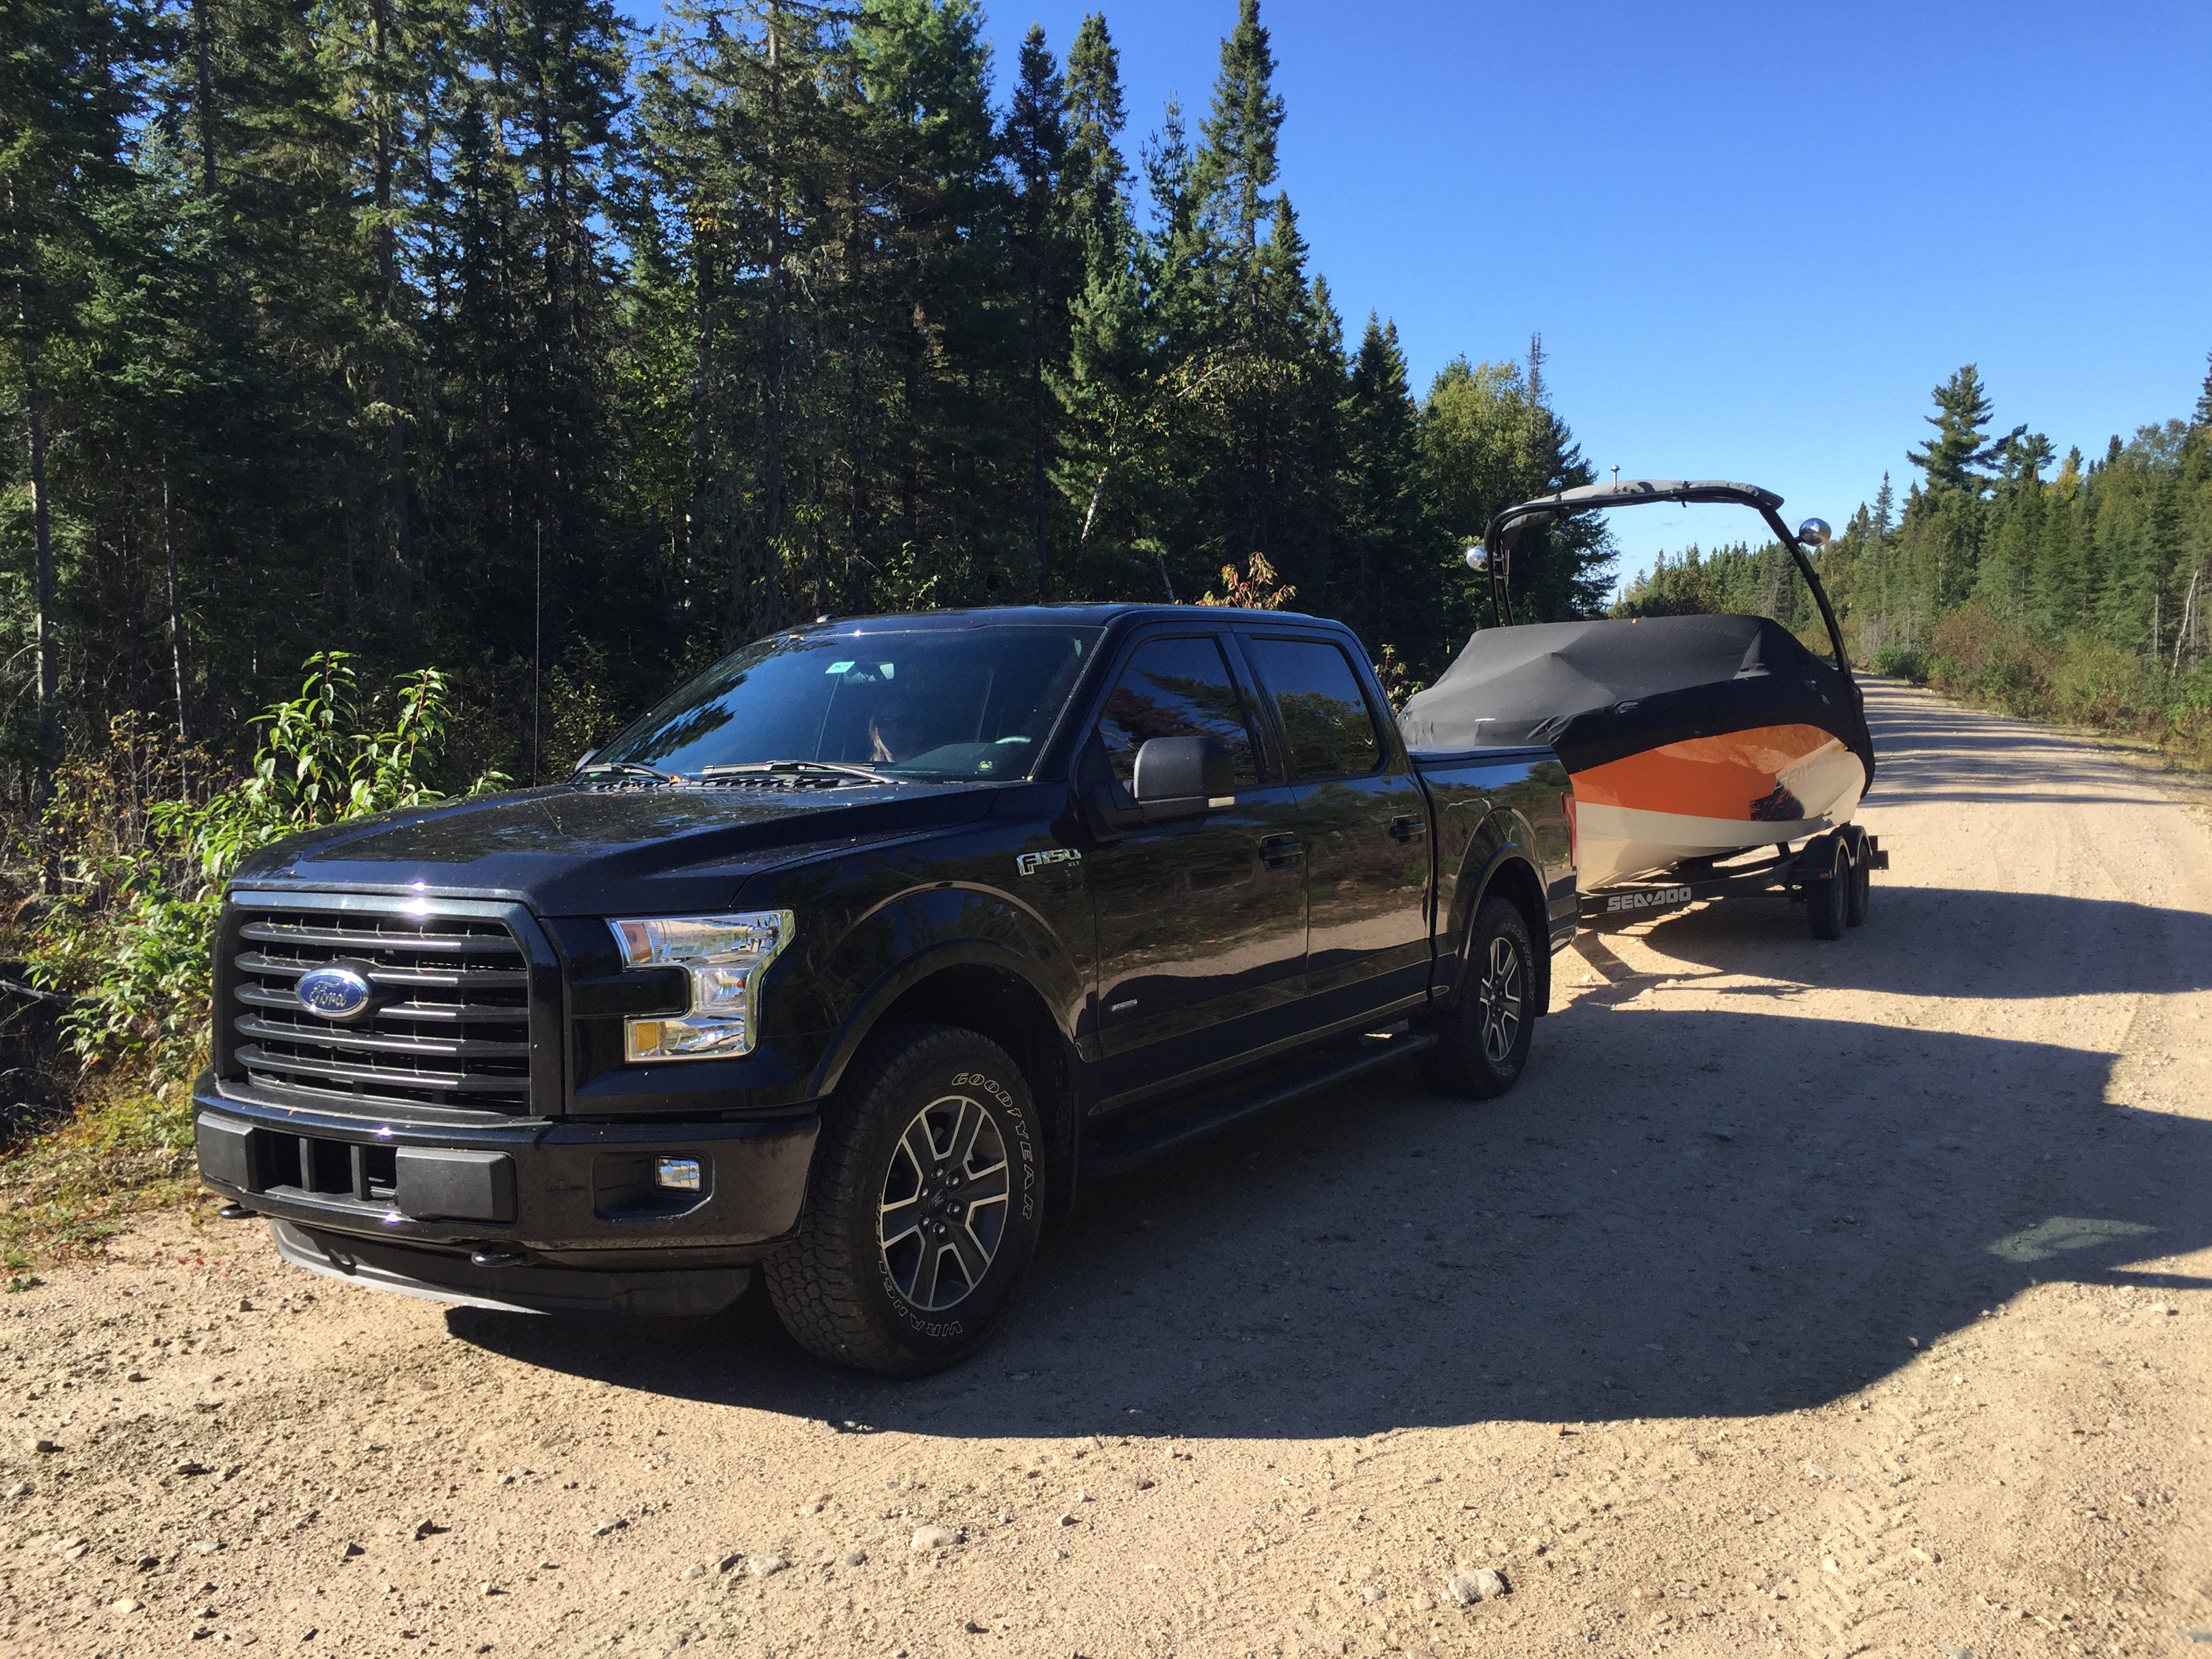 2015 Ford F 150 Xlt Ecoboost Towing Capacity Ford F 150 2.7 L Towing Capacity